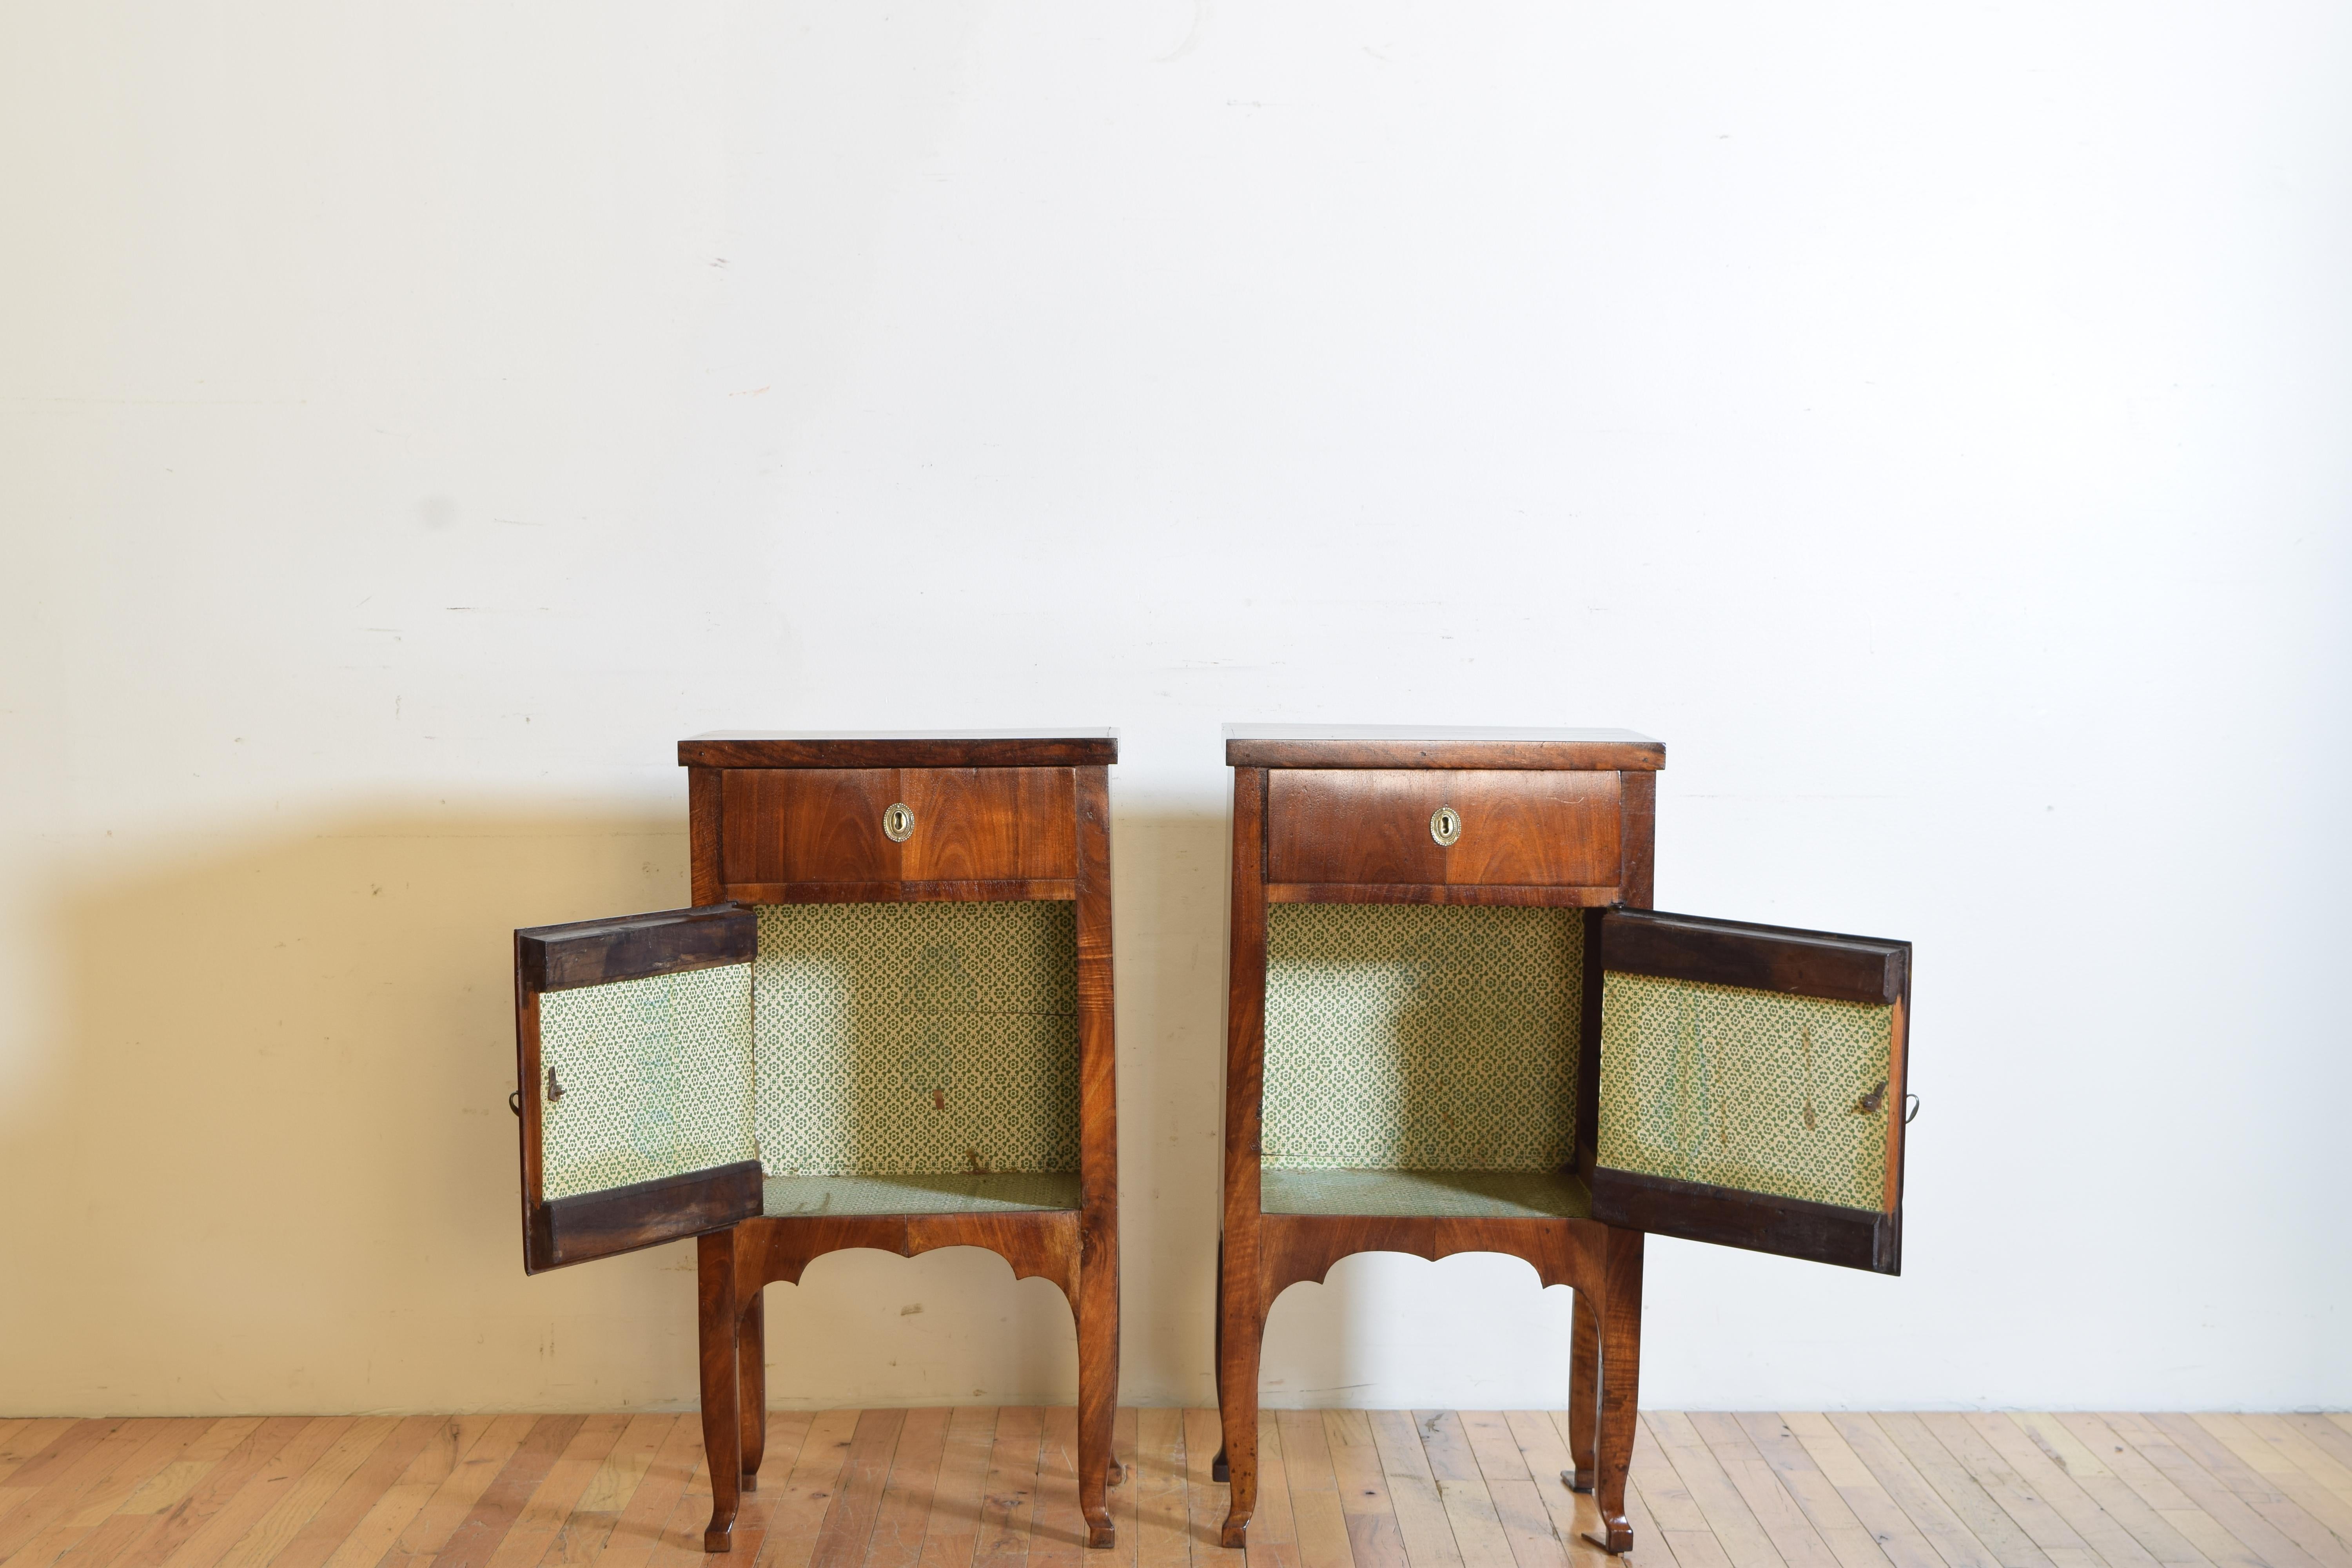 Mid-19th Century Pair of Northern Italian Figured and Shaped Walnut Bedside Commodes 19th Century